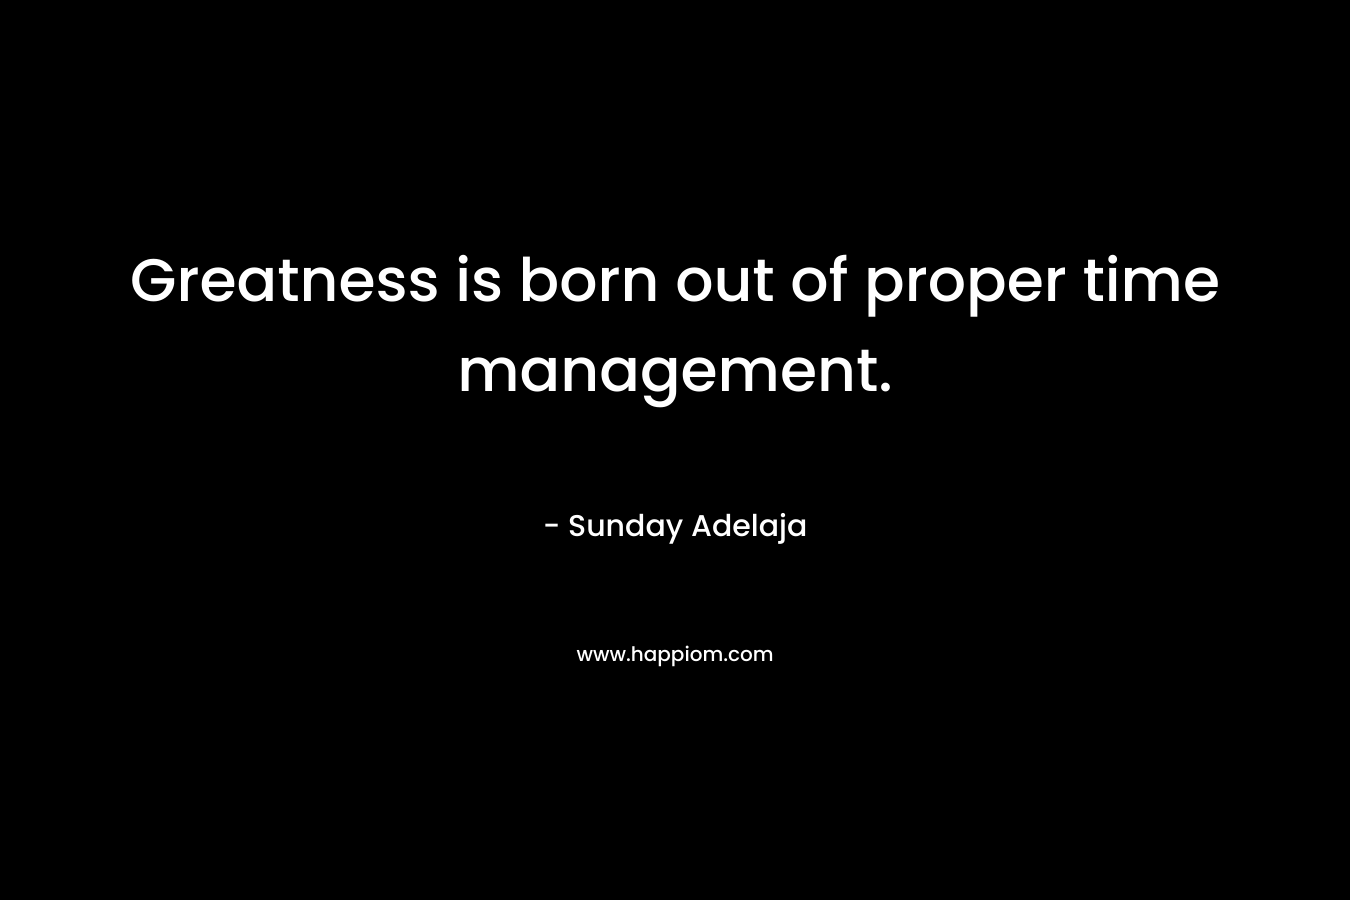 Greatness is born out of proper time management.